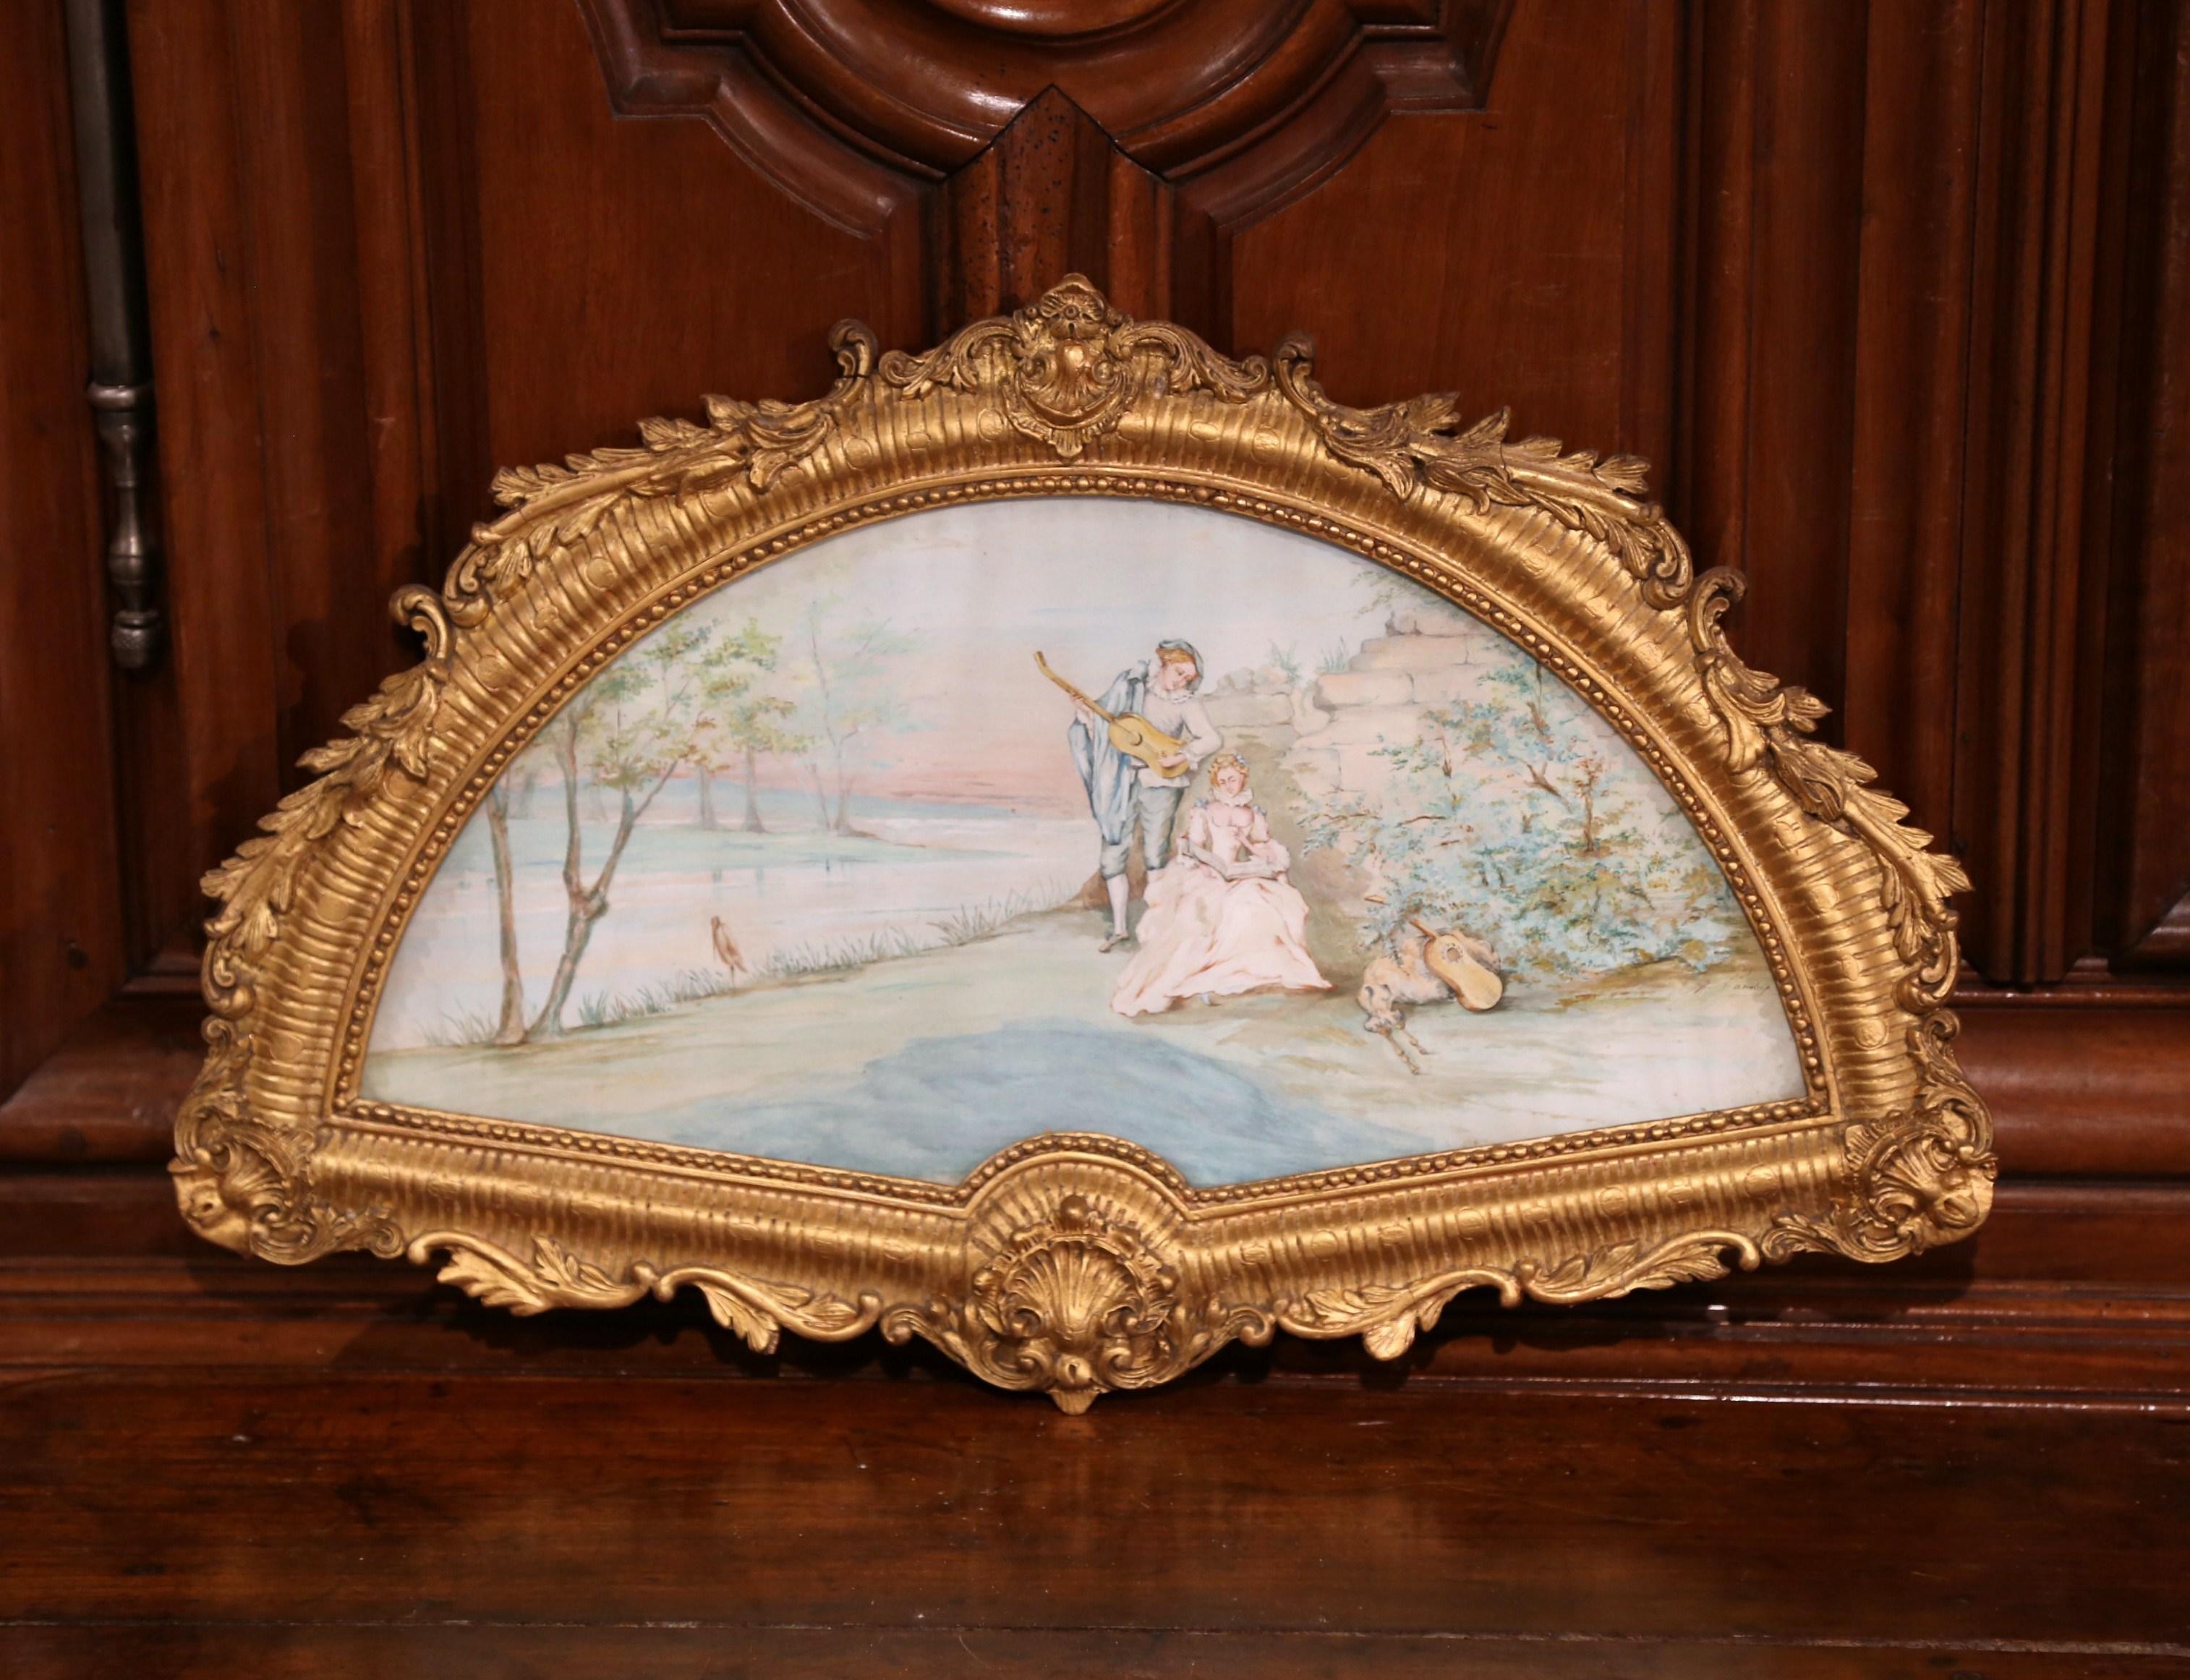 Shaped as a fan, this antique painting was created in Paris, France circa 1870. The elegant watercolor scene features a romantic courtly scene in which a gentleman serenades a young woman. The shape of the piece mimics an accessory (the fan) that